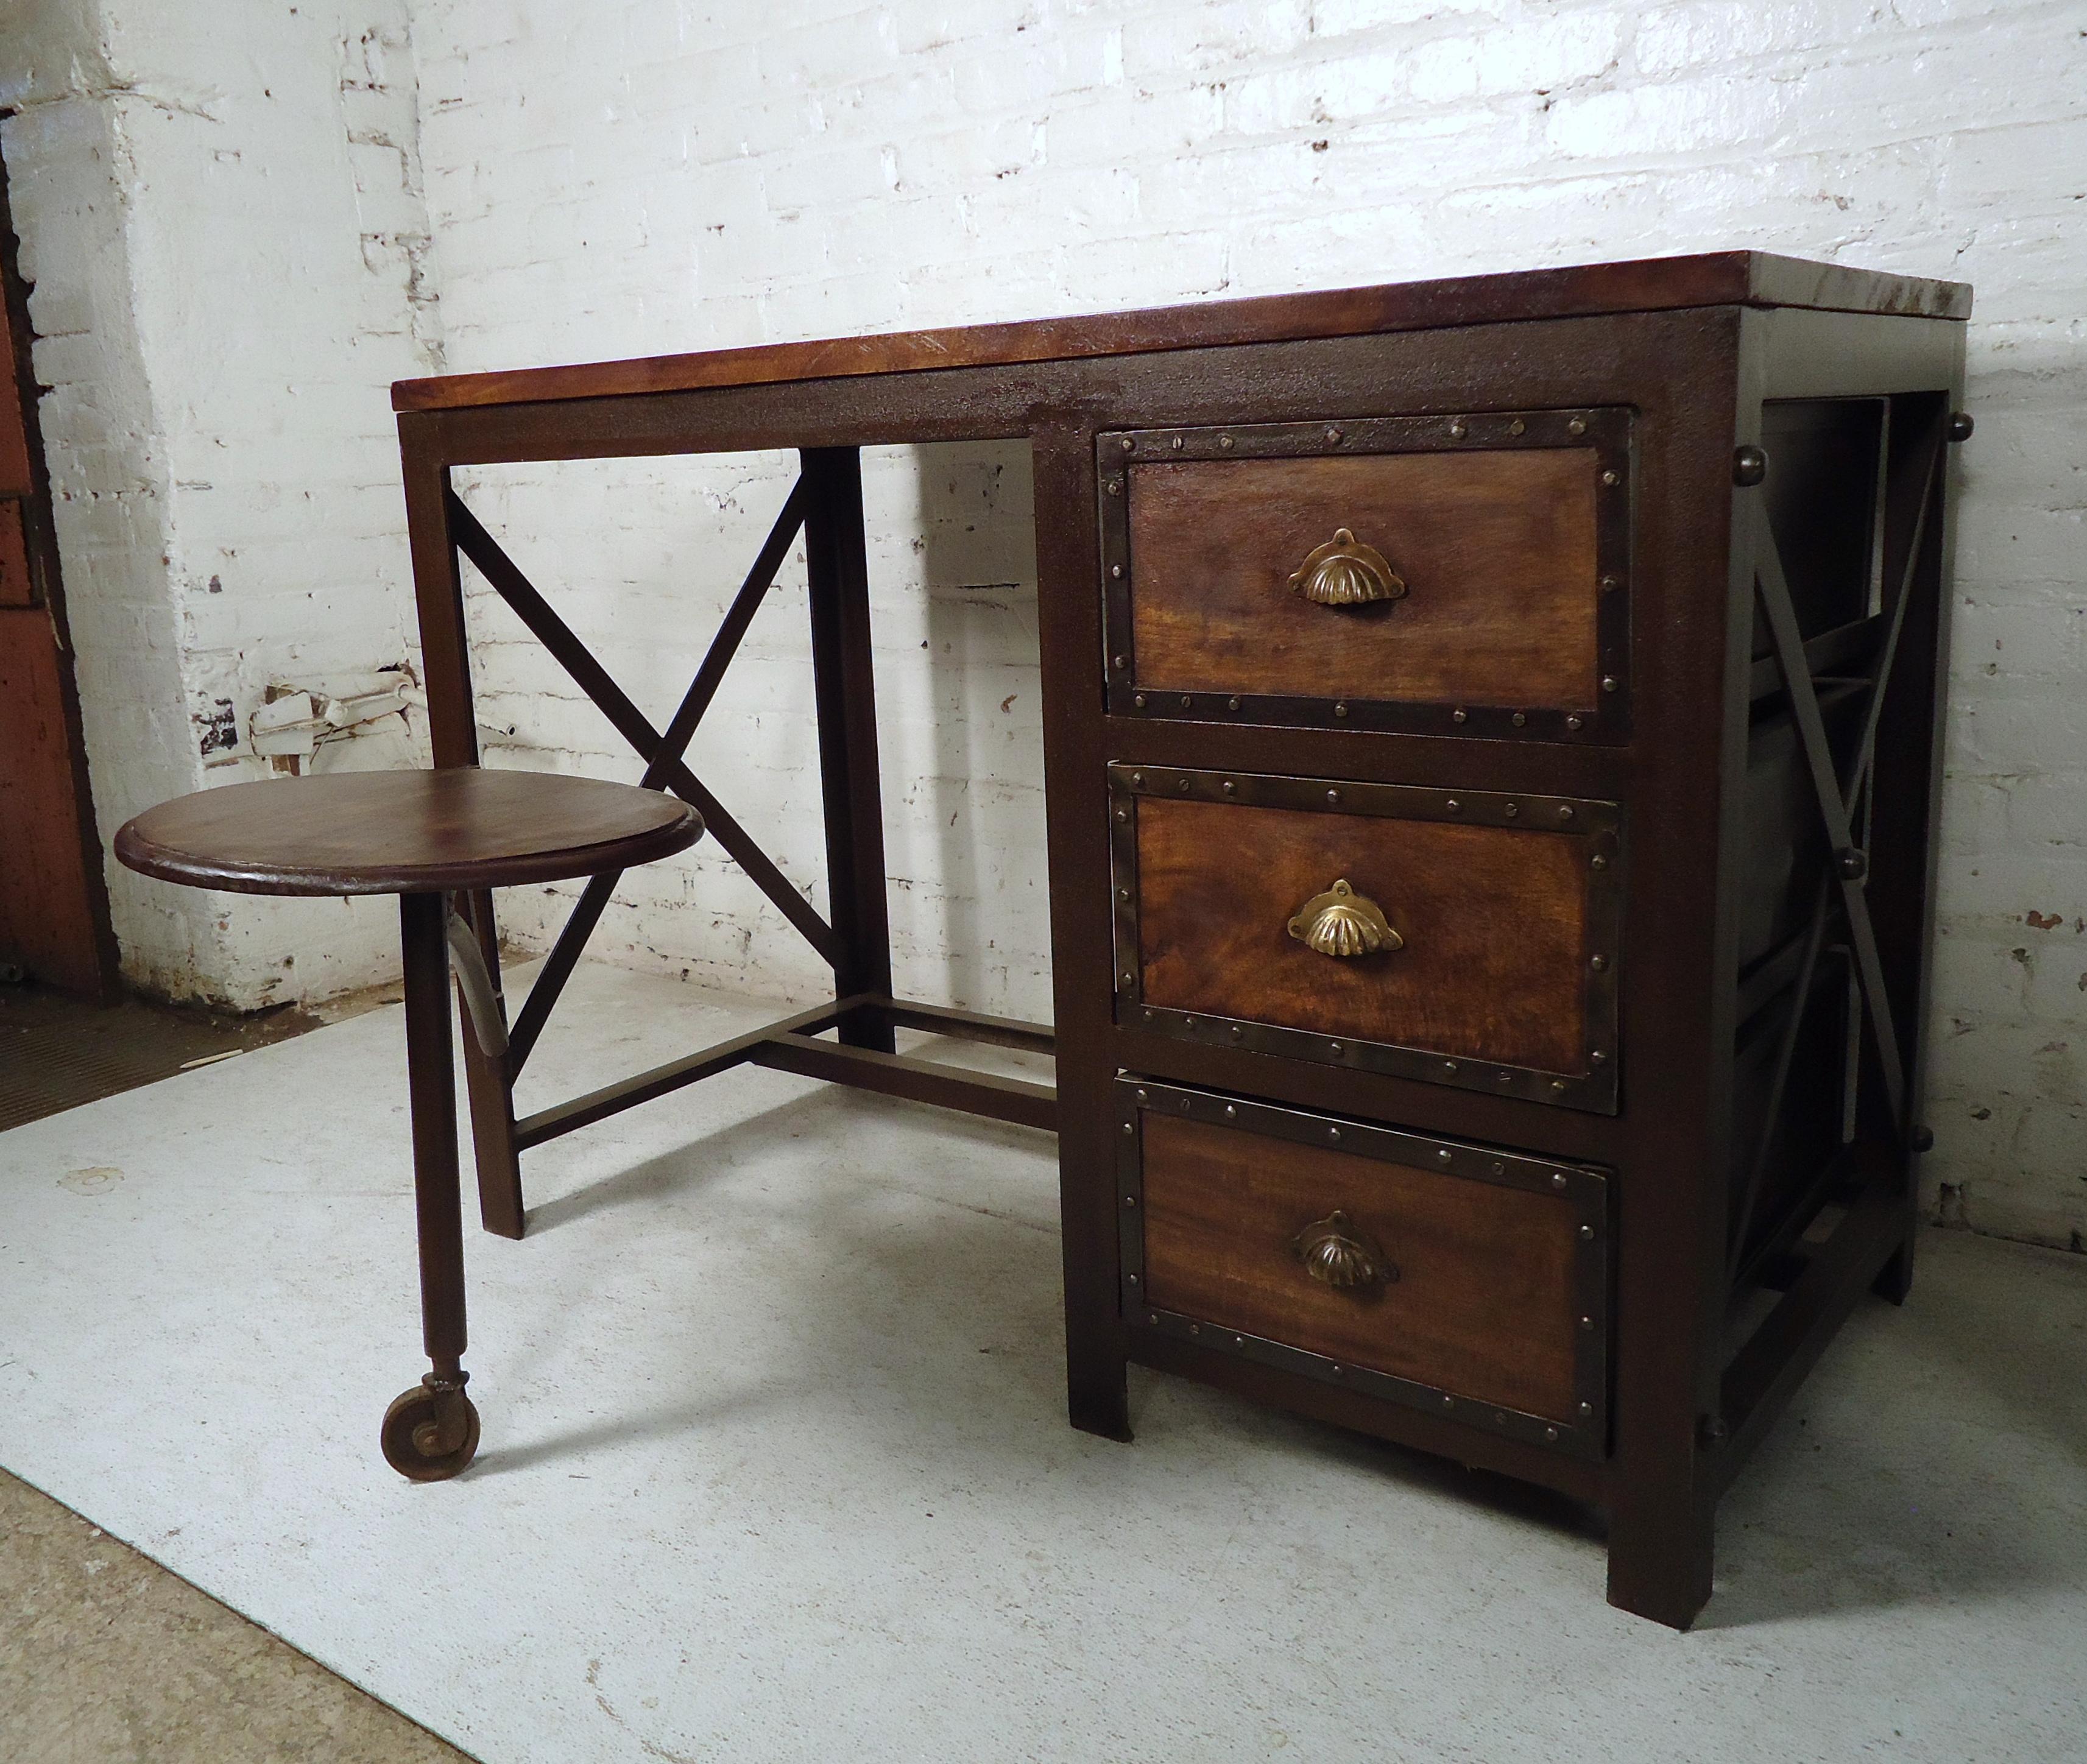 Mid-20th Century Vintage Industrial Writing Desk with Seat